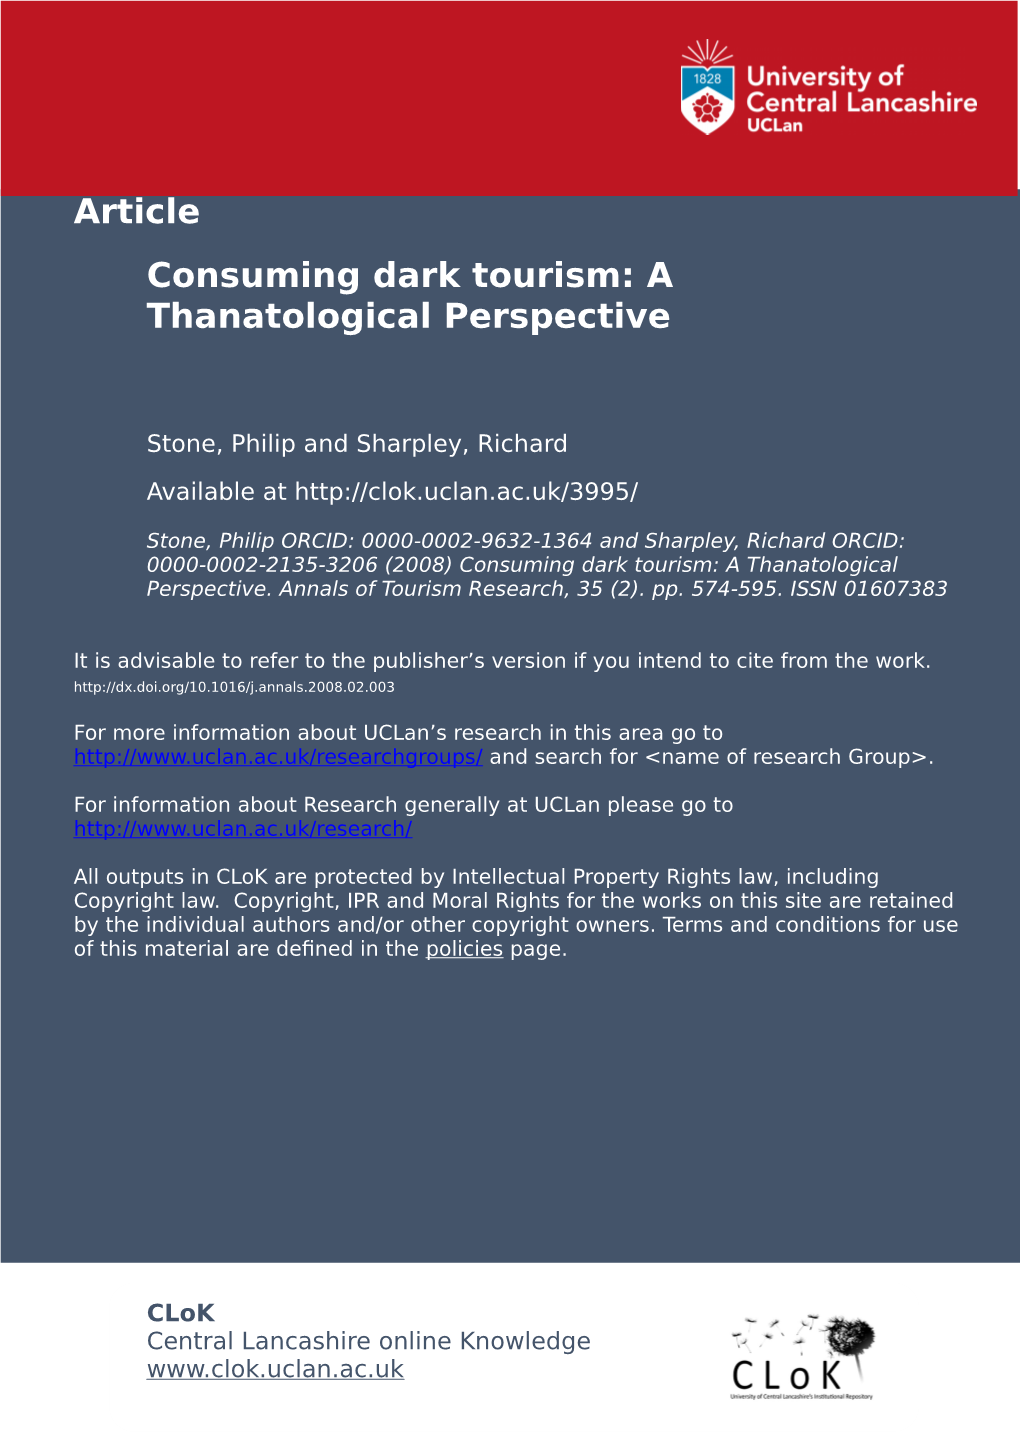 Consuming Dark Tourism: a Thanatological Perspective